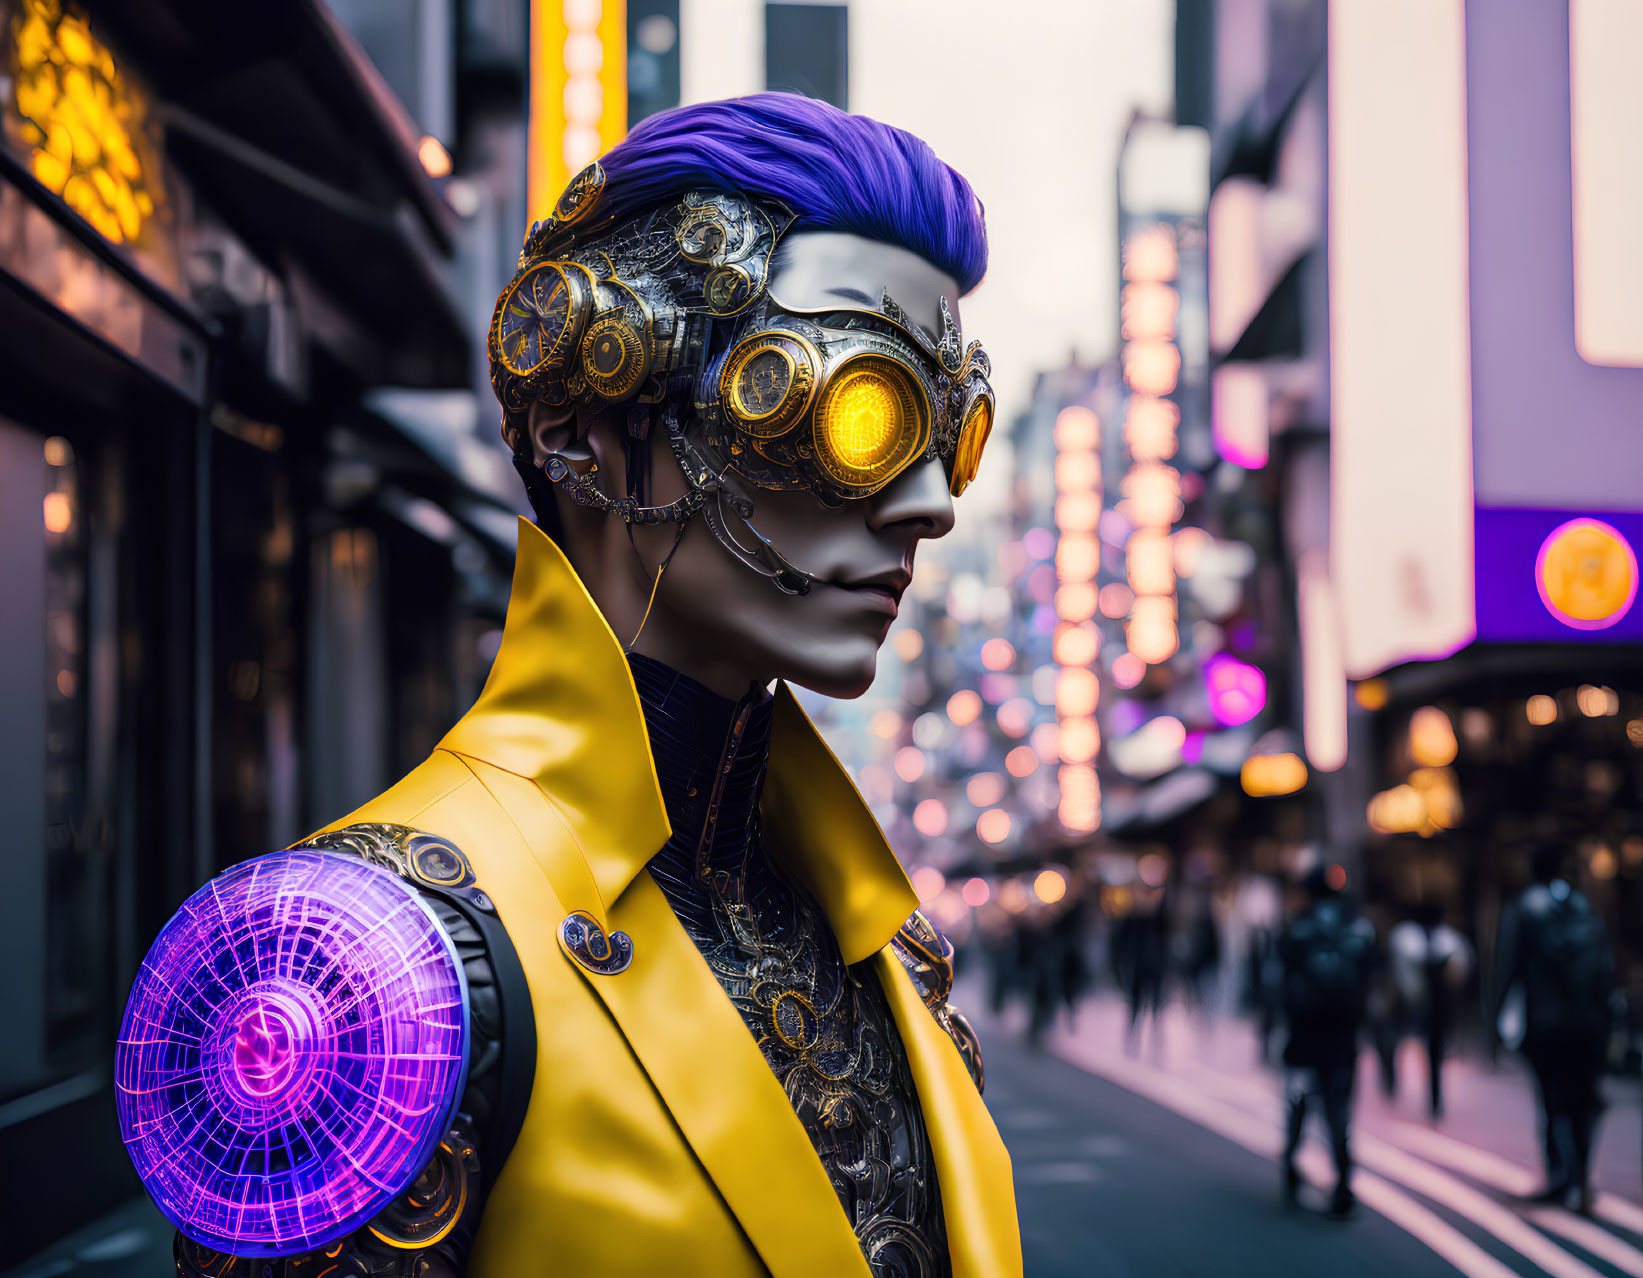 Futuristic cyberpunk character with purple hair, yellow jacket, and golden goggles in neon-lit